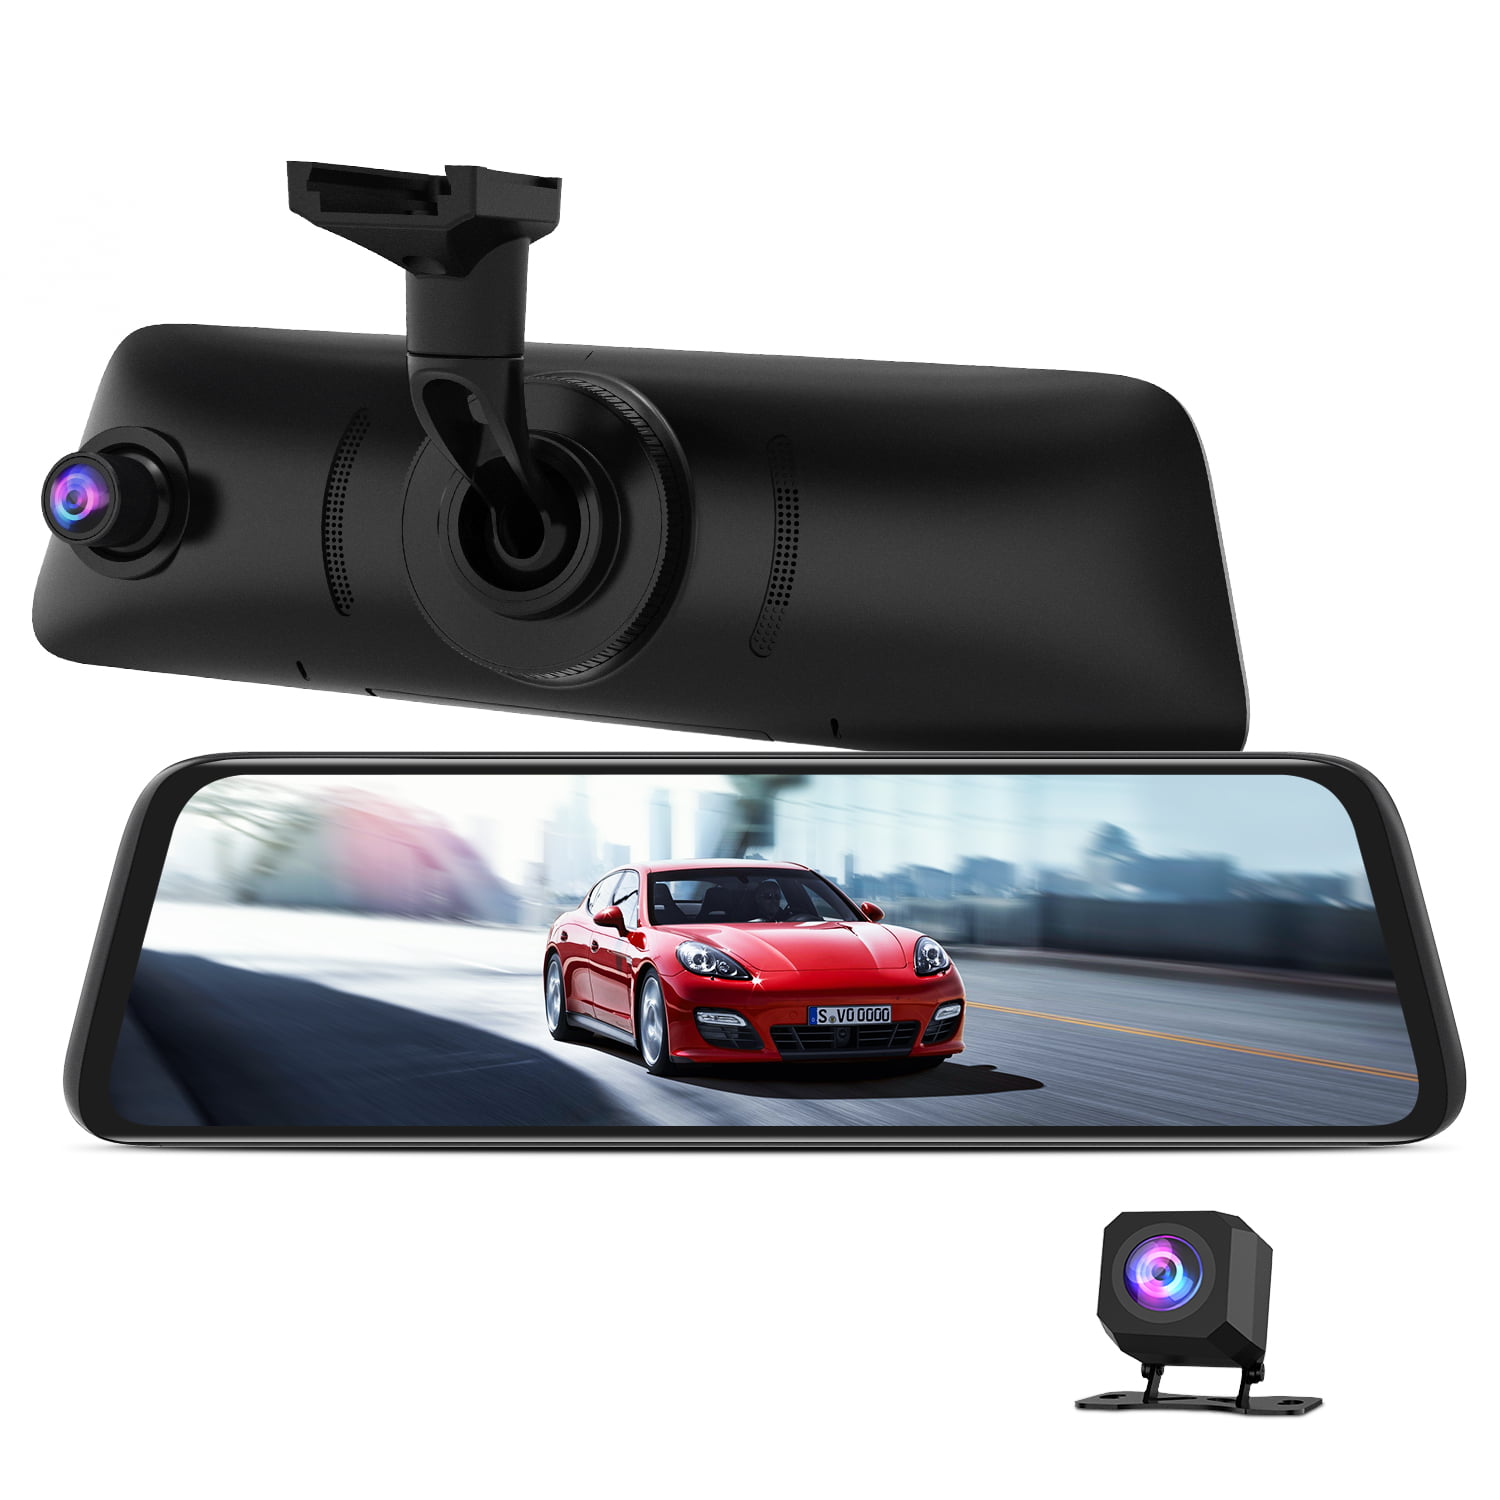 AUTO-VOX V5PRO Anti-Glare Rear View Mirror Dash Cam Front Rear 1080P Dash Camera for Cars 9.35''Full Laminated Touch Screen and Super Night Vision with Sony Sensor,GPS Tracking - Walmart.com